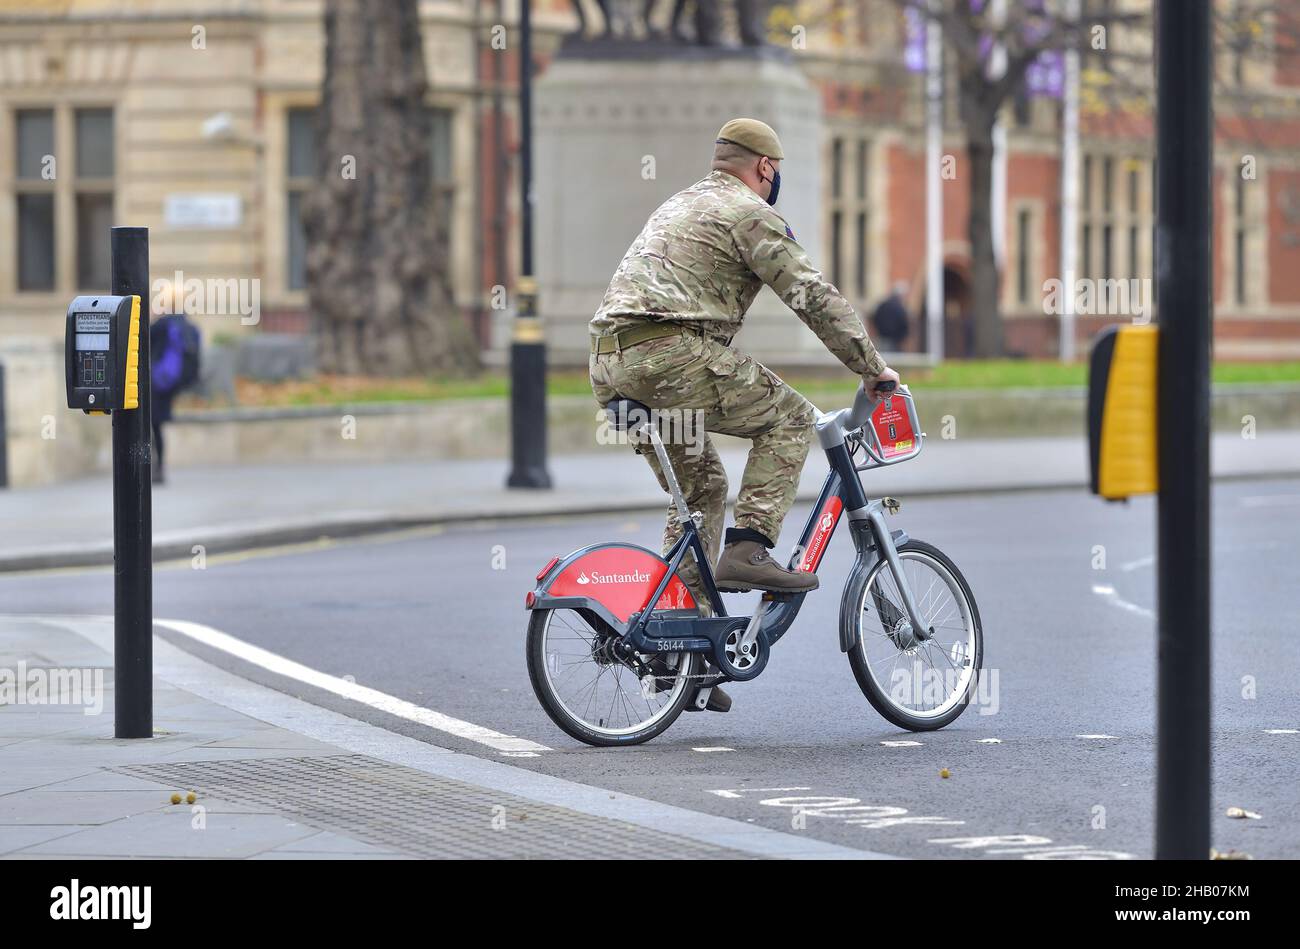 London, England, UK. Soldier in camouflage riding a Santander hire cycle / Boris Bike in Parliament Square Stock Photo